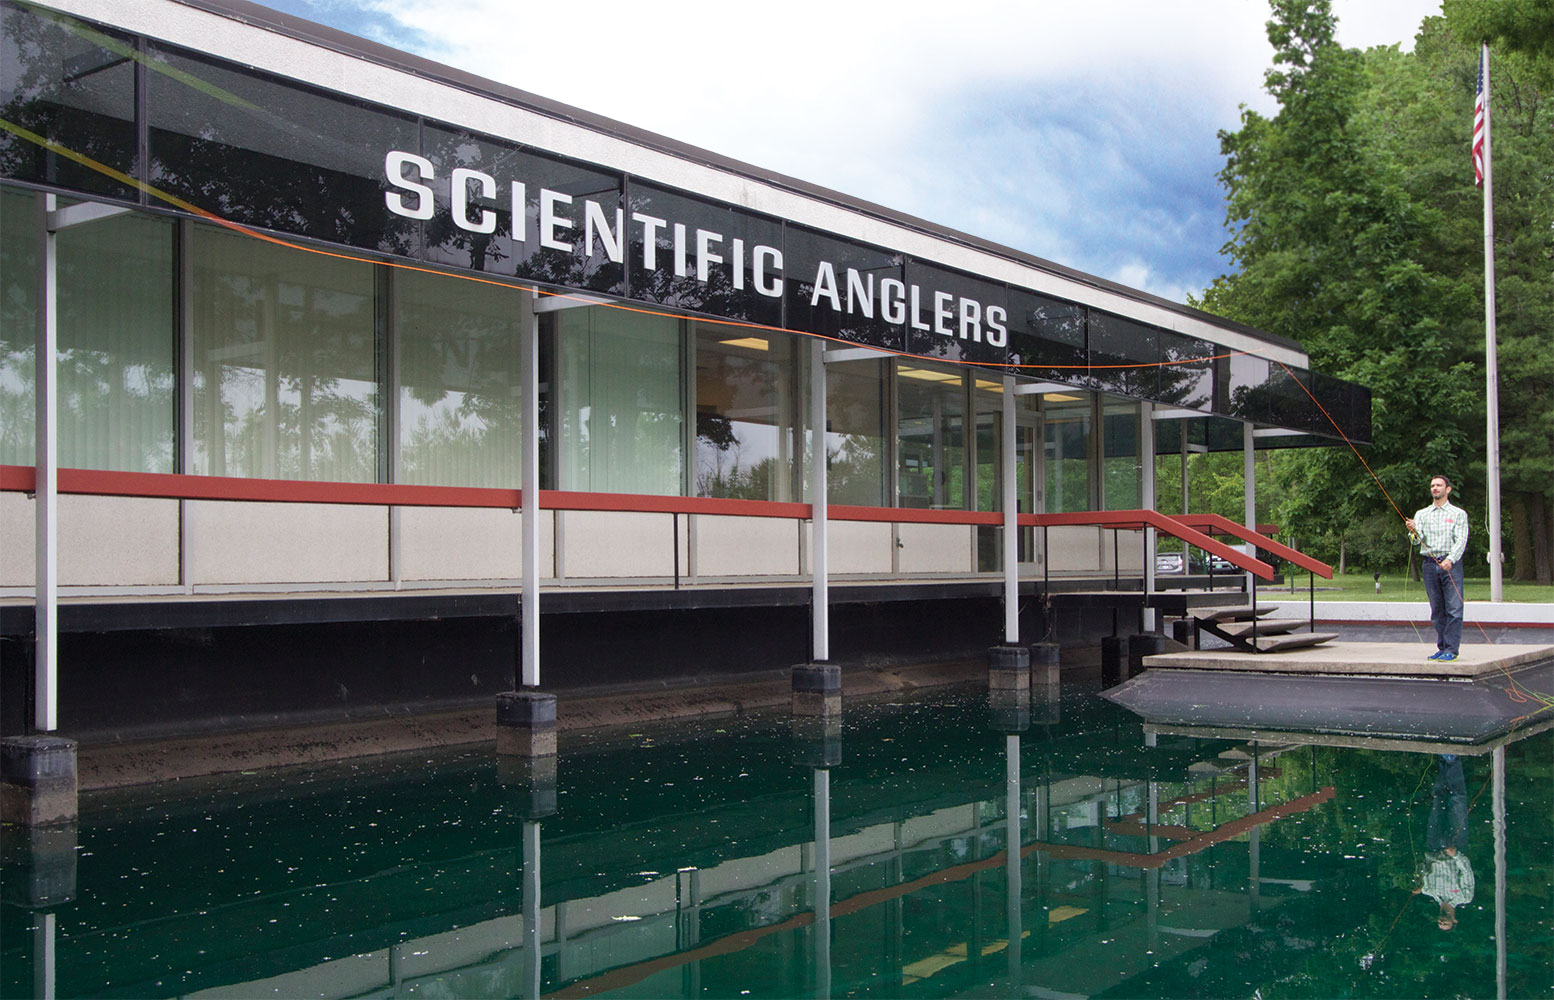 About Scientific Anglers